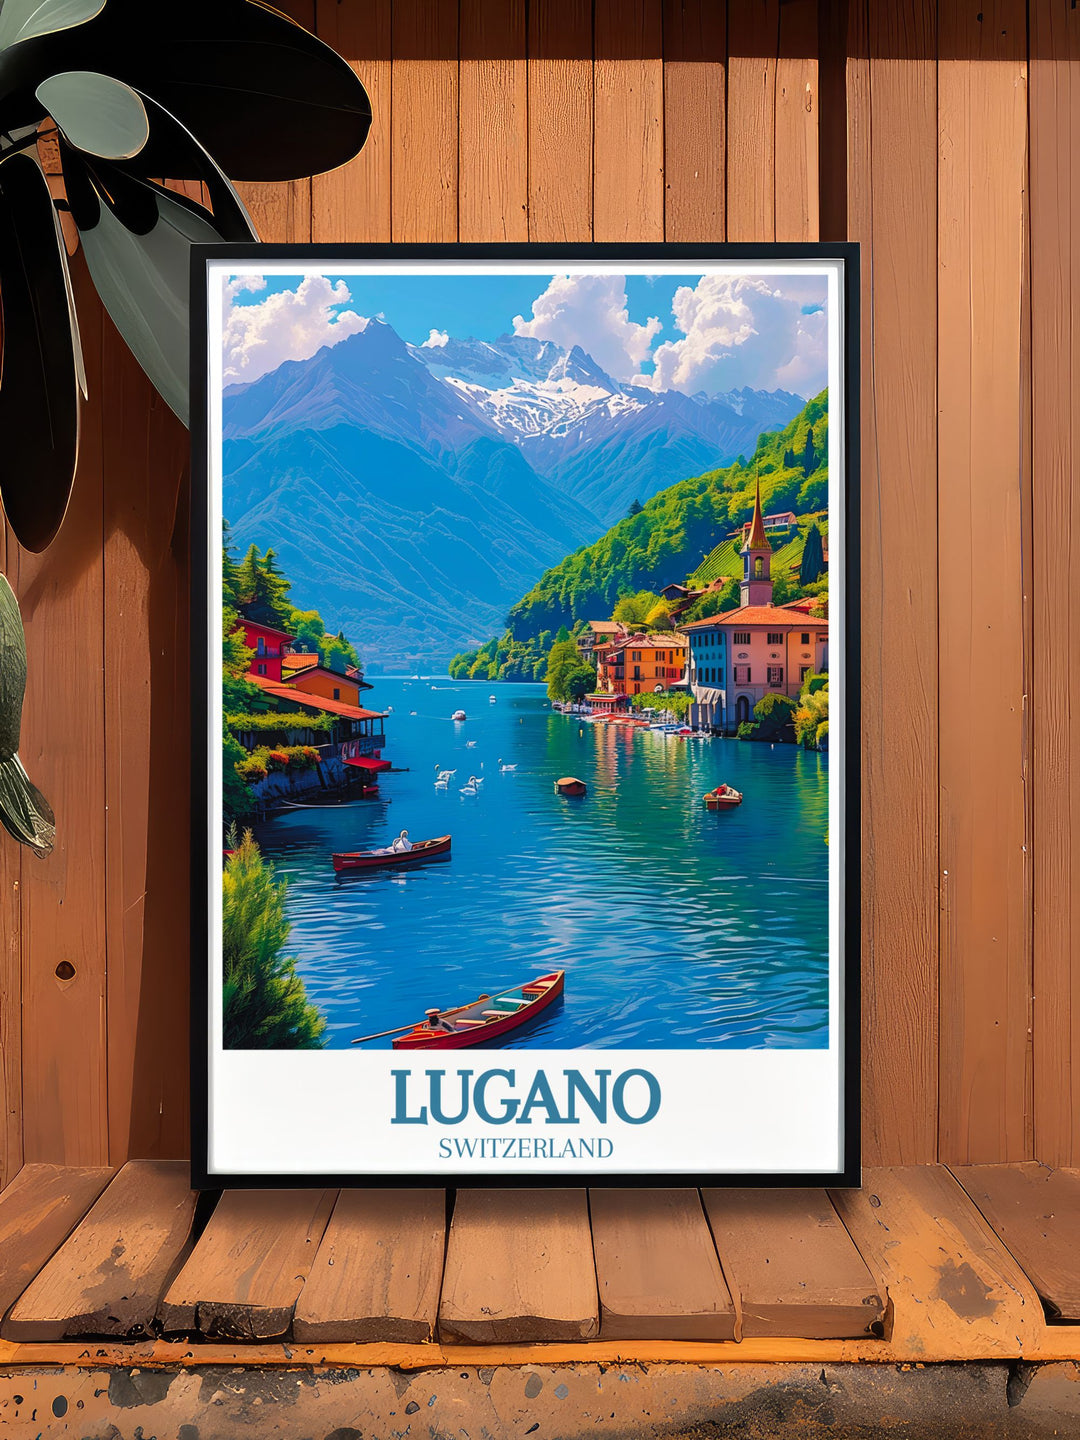 Highlighting the majestic Monte Brè, this travel poster captures its scenic trails and breathtaking views. Perfect for those who love outdoor adventures and stunning landscapes.